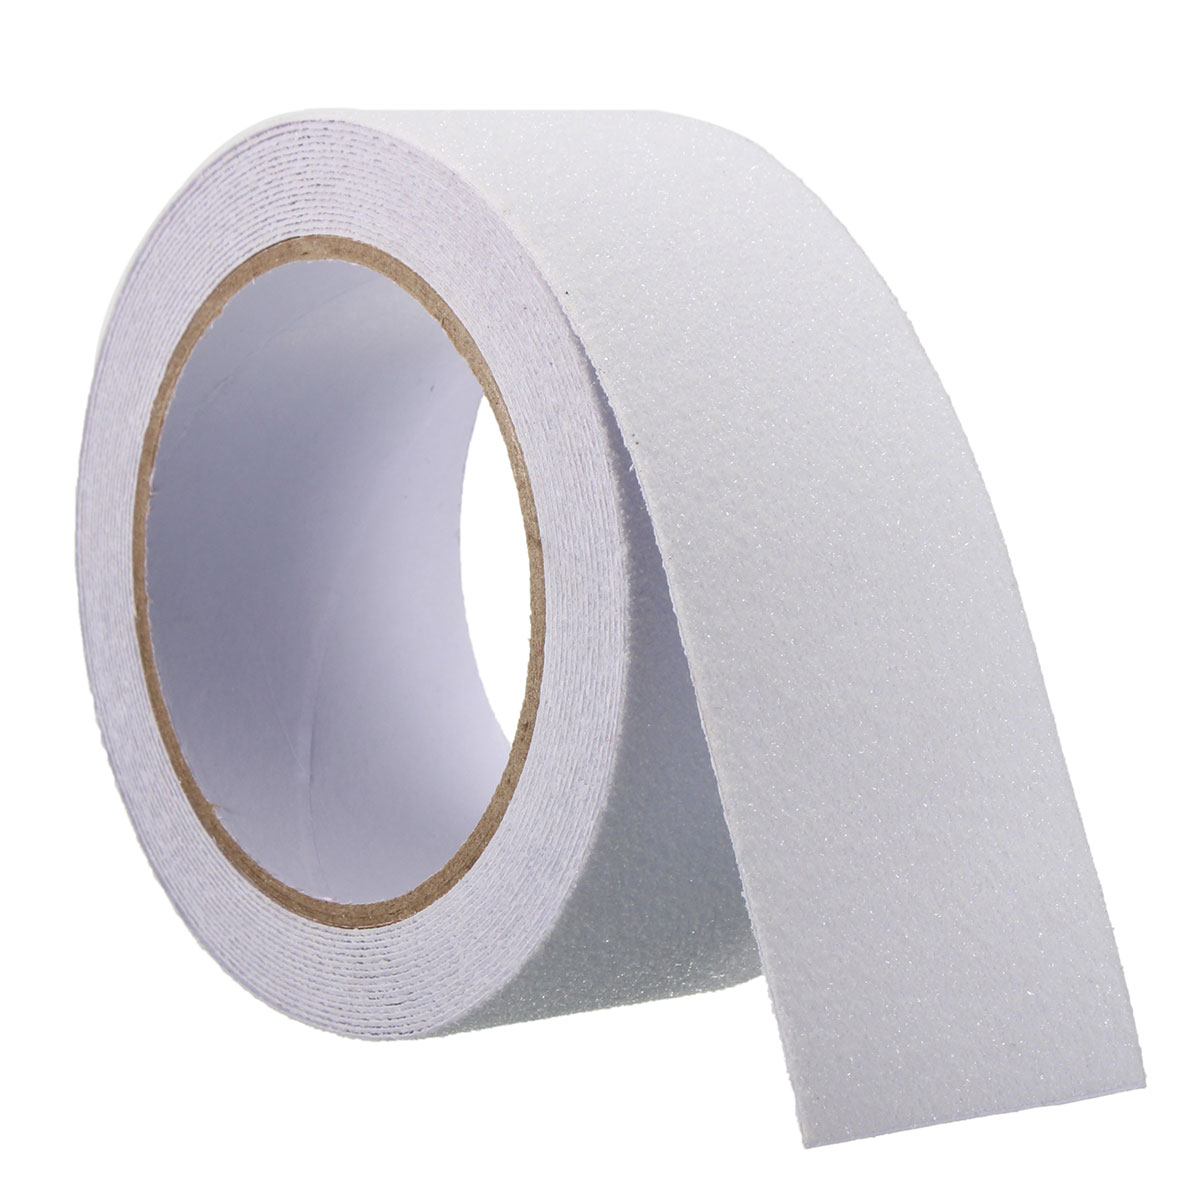 5CM-x-5M-Non-Slip-In-The-Dark-Tape-Anti-Slip-Adhesive-Grip-for-Stairs-and-Gaffers-165-Feet-Long-1382967-8